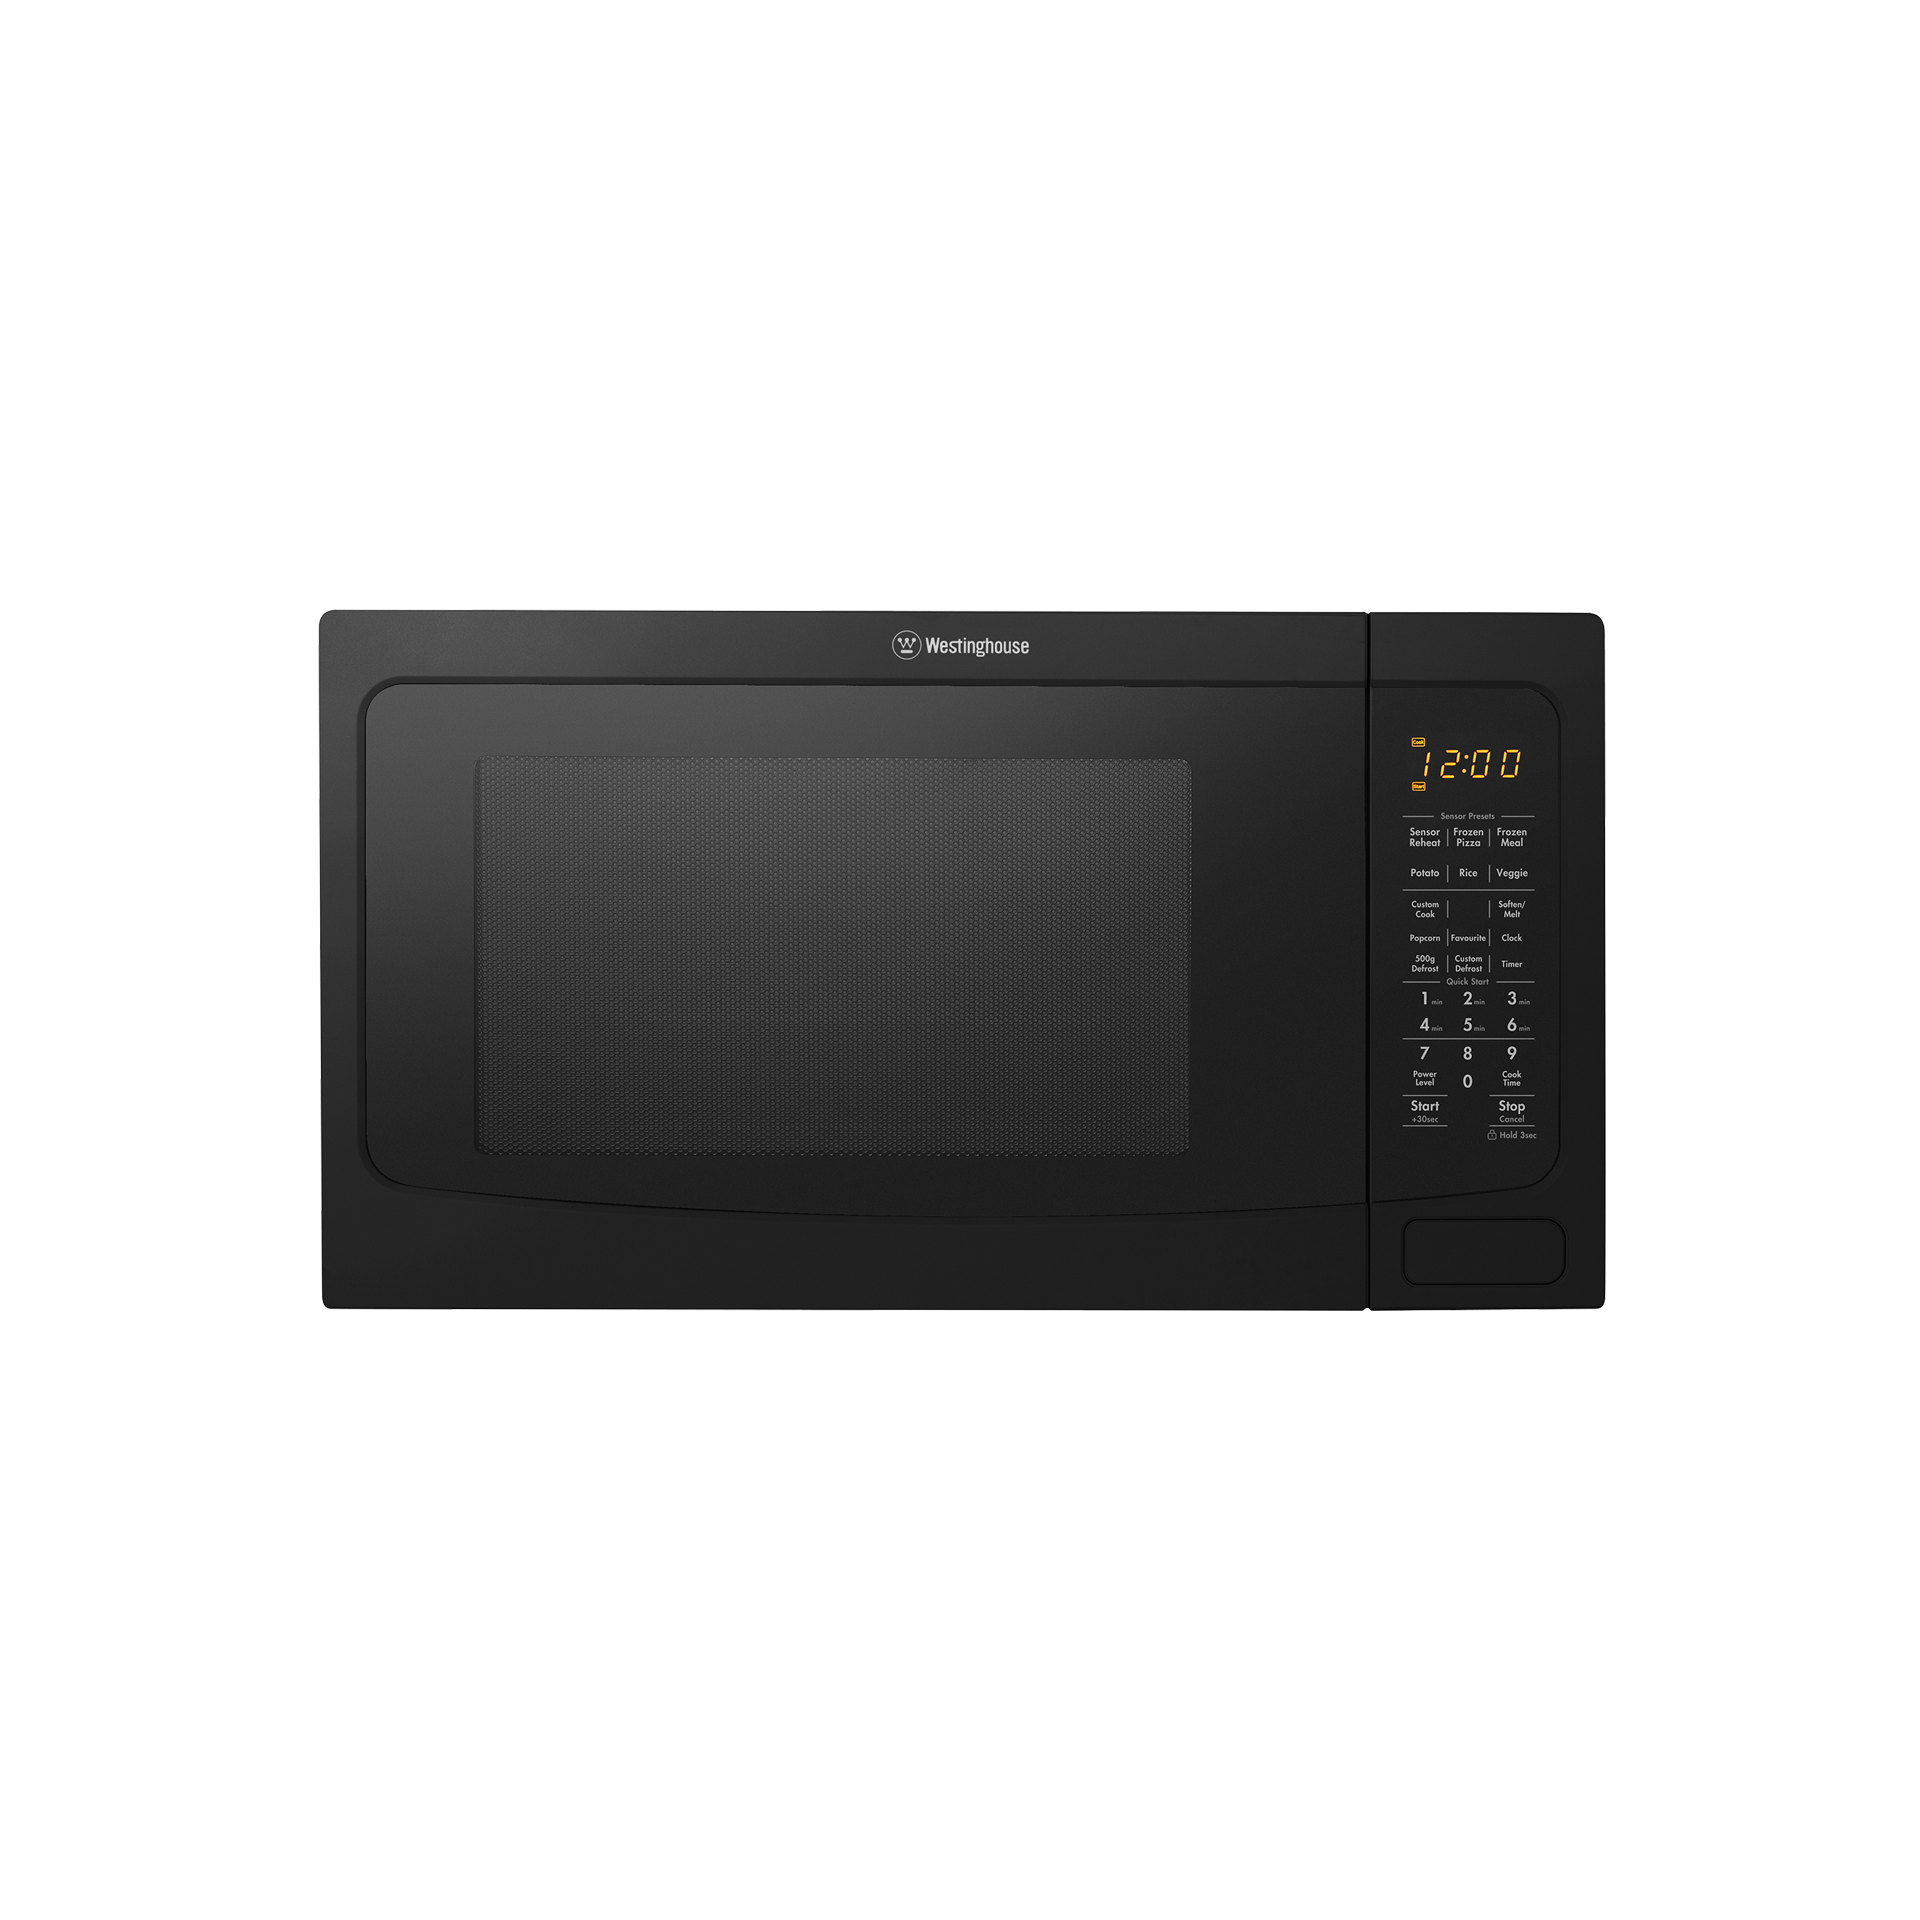 Westinghouse Black Oven Microwave Download HD PNG Image